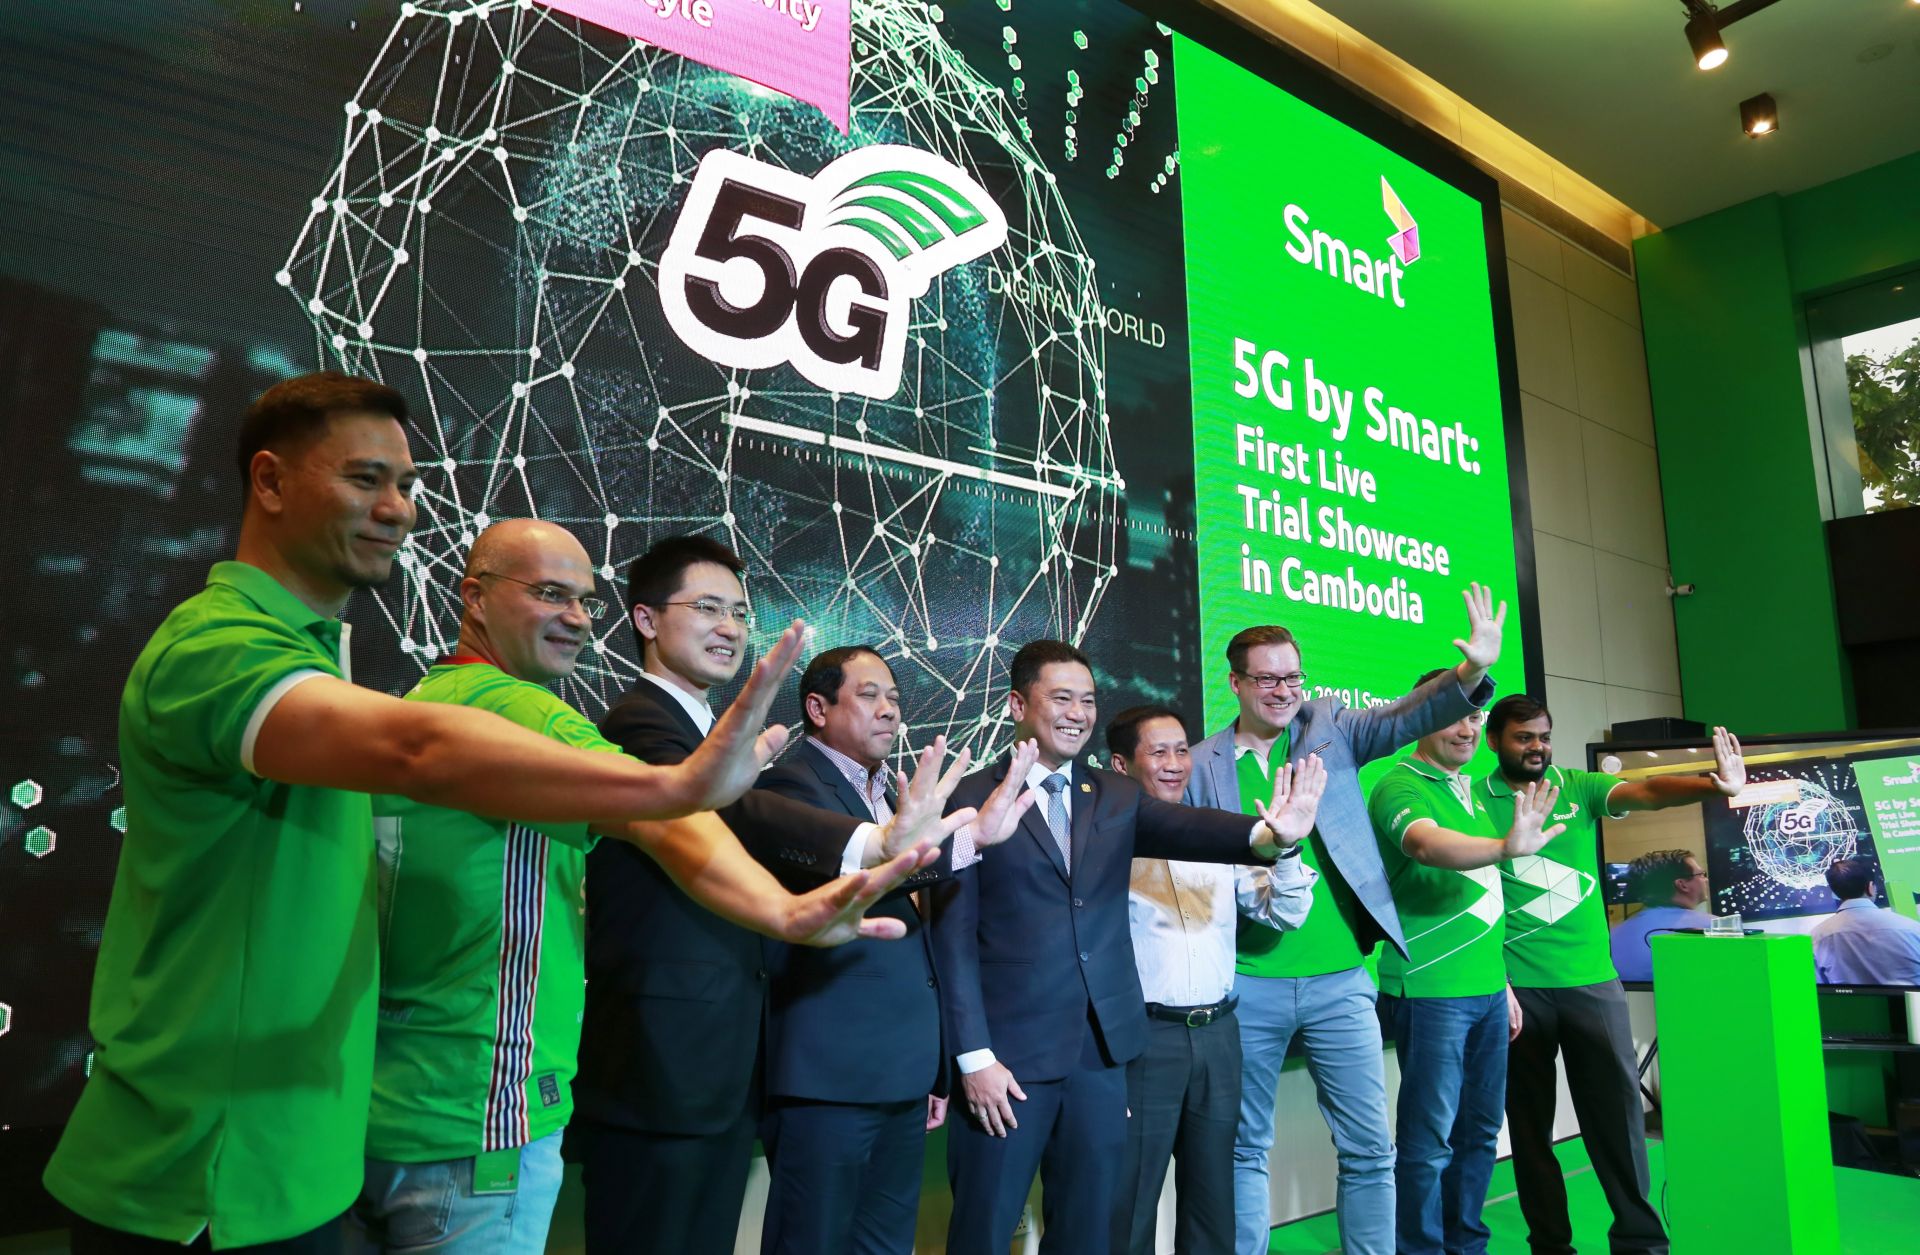 Beyond 5G networks like the one Huawei is helping build in Cambodia with partner Smart Axiata, Chinese companies are aggressively building cloud computing and ecommerce businesses to serve markets in Southeast Asia.